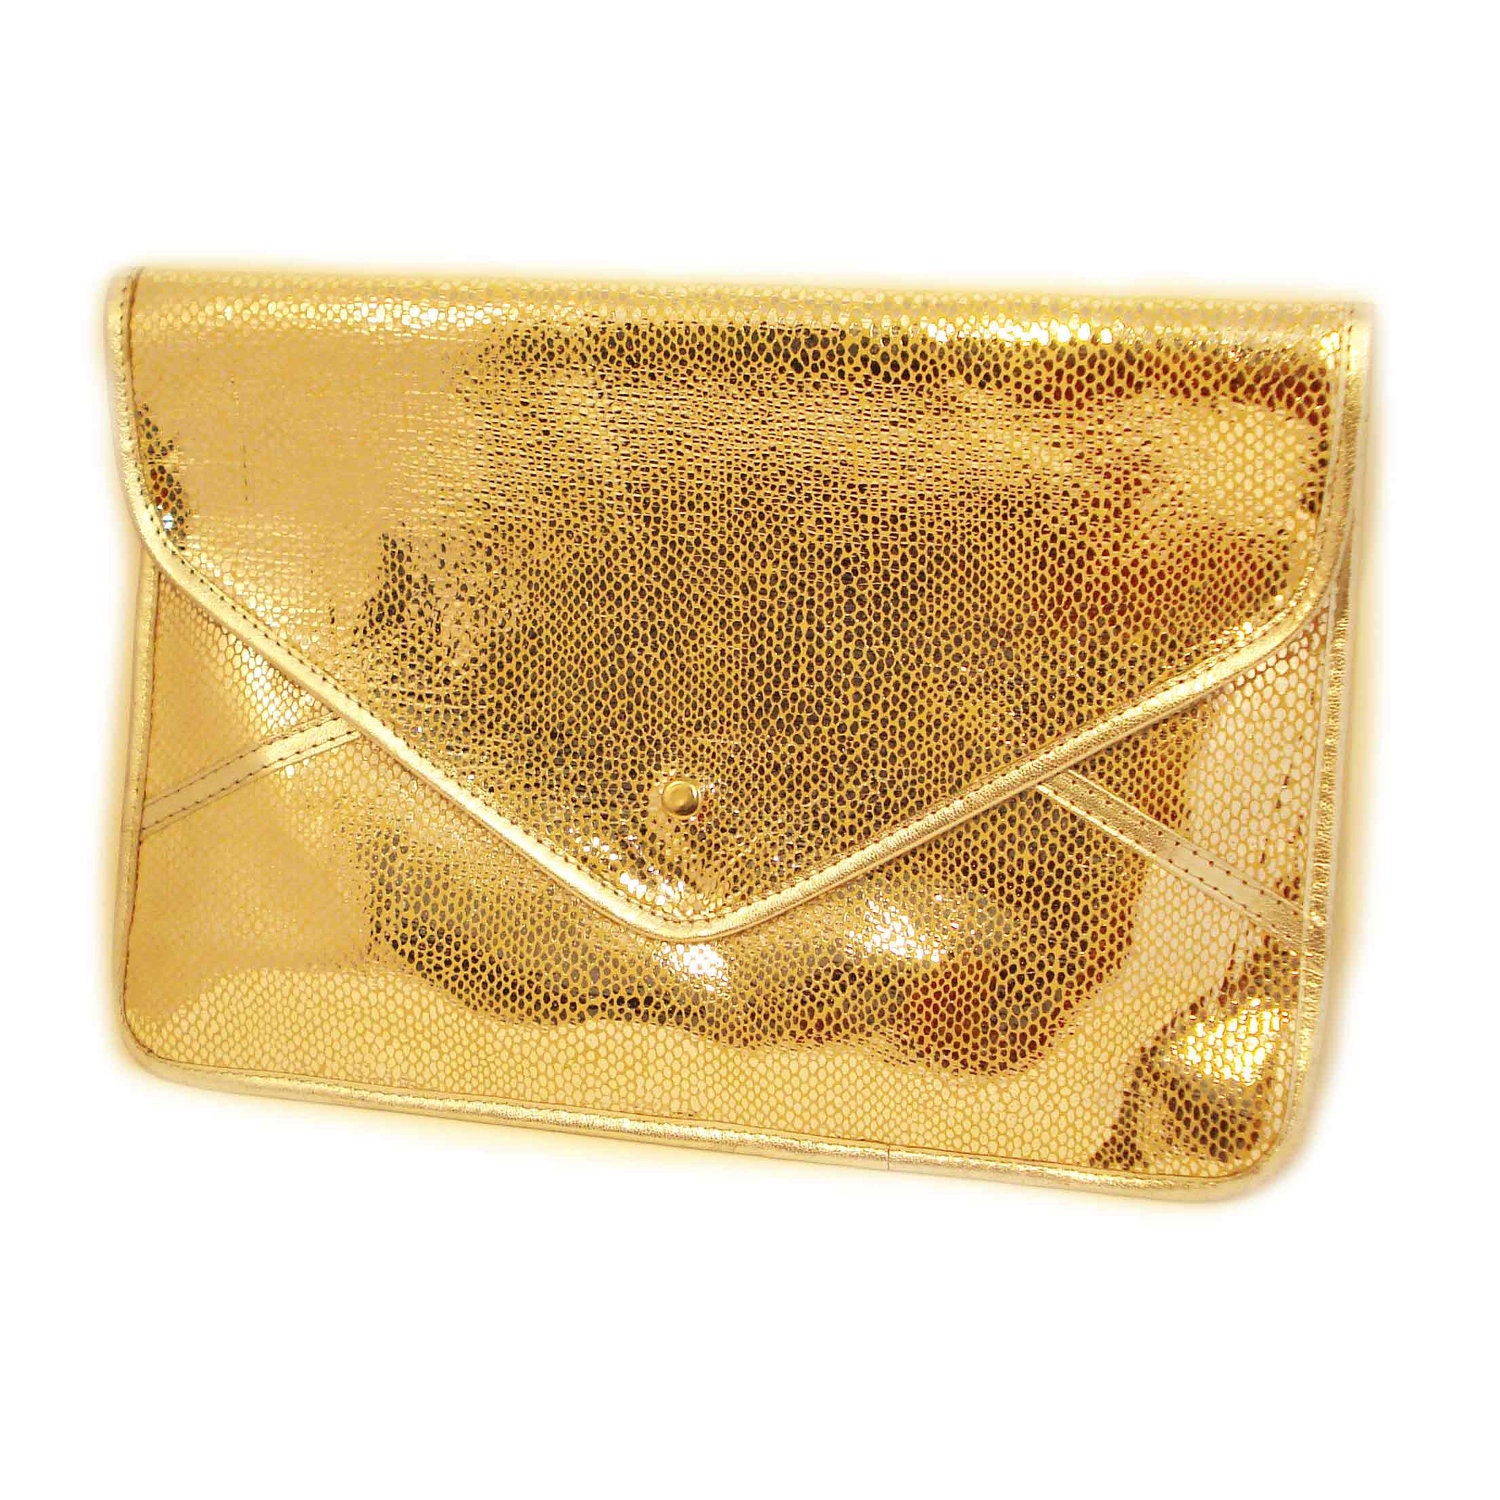 Leather Envelope Clutch Bag / Leather iPad Bag in Gold / Free Shipping - osnatharnoy